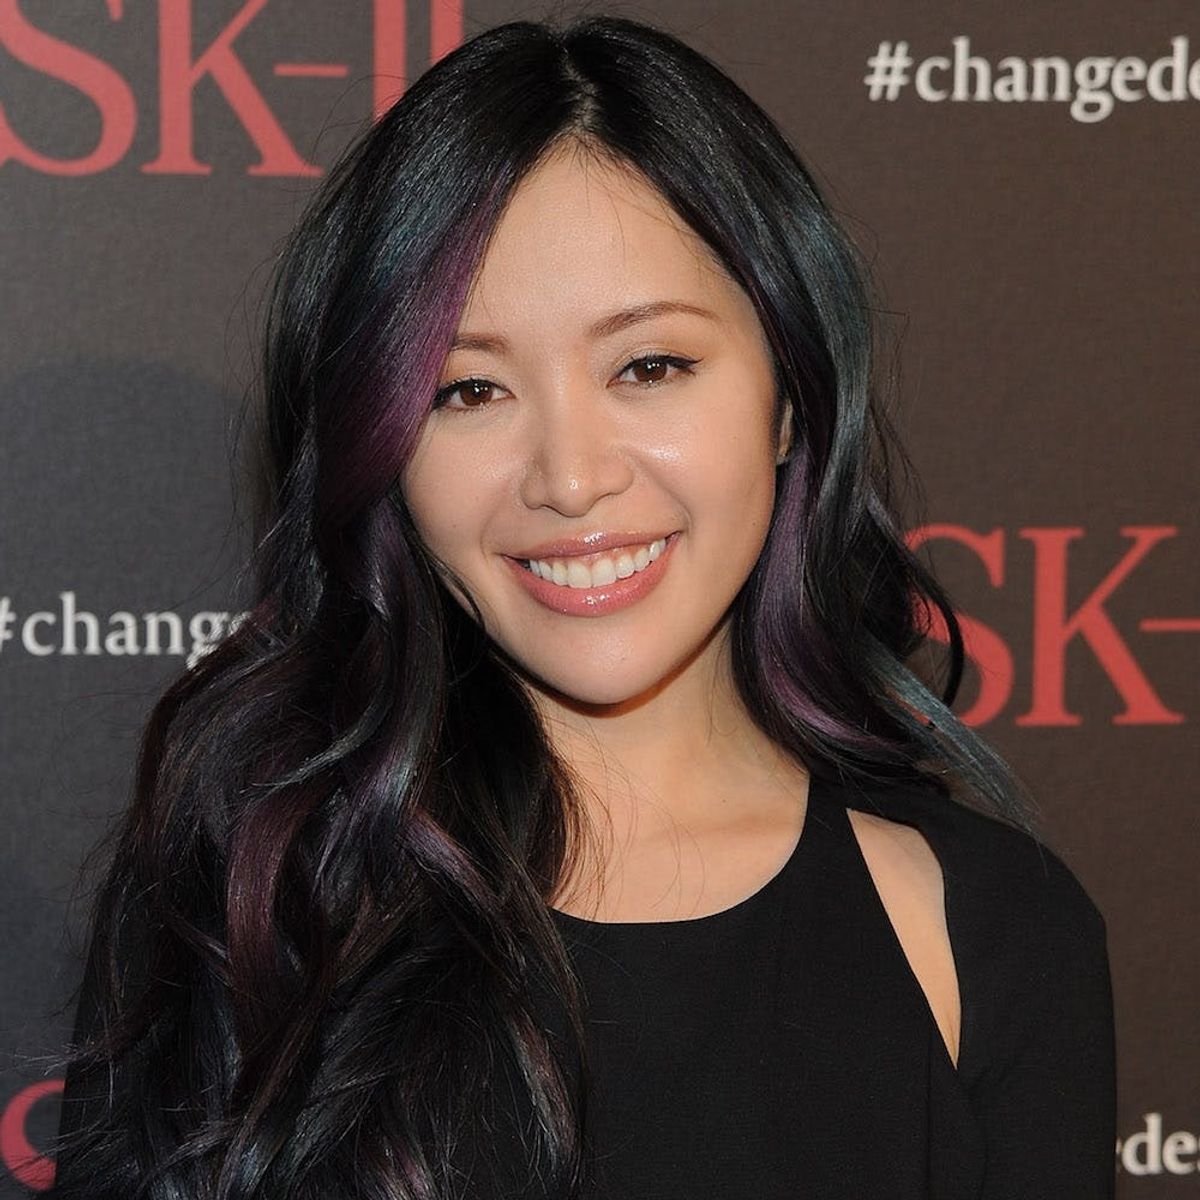 Where Has Michelle Phan Been?